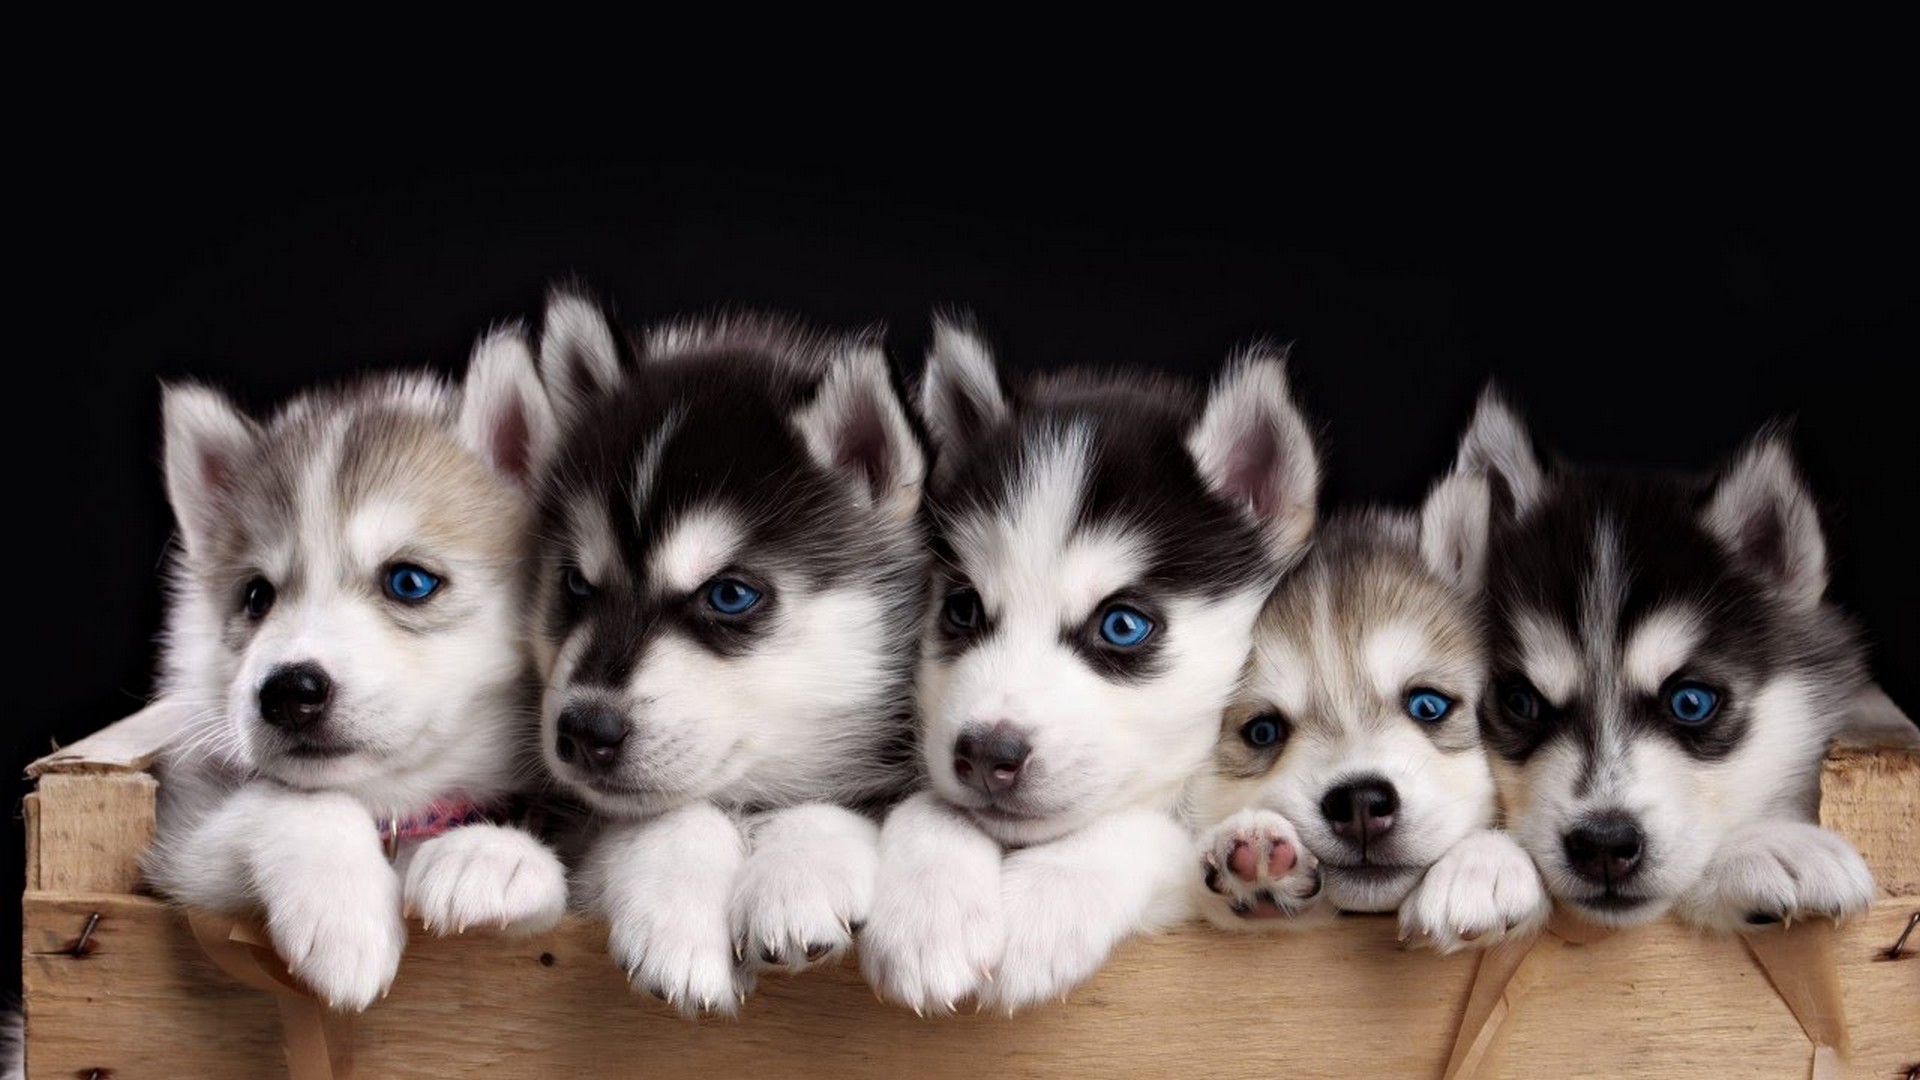 Funny Puppies Desktop Backgrounds HD Resolution 1920x1080